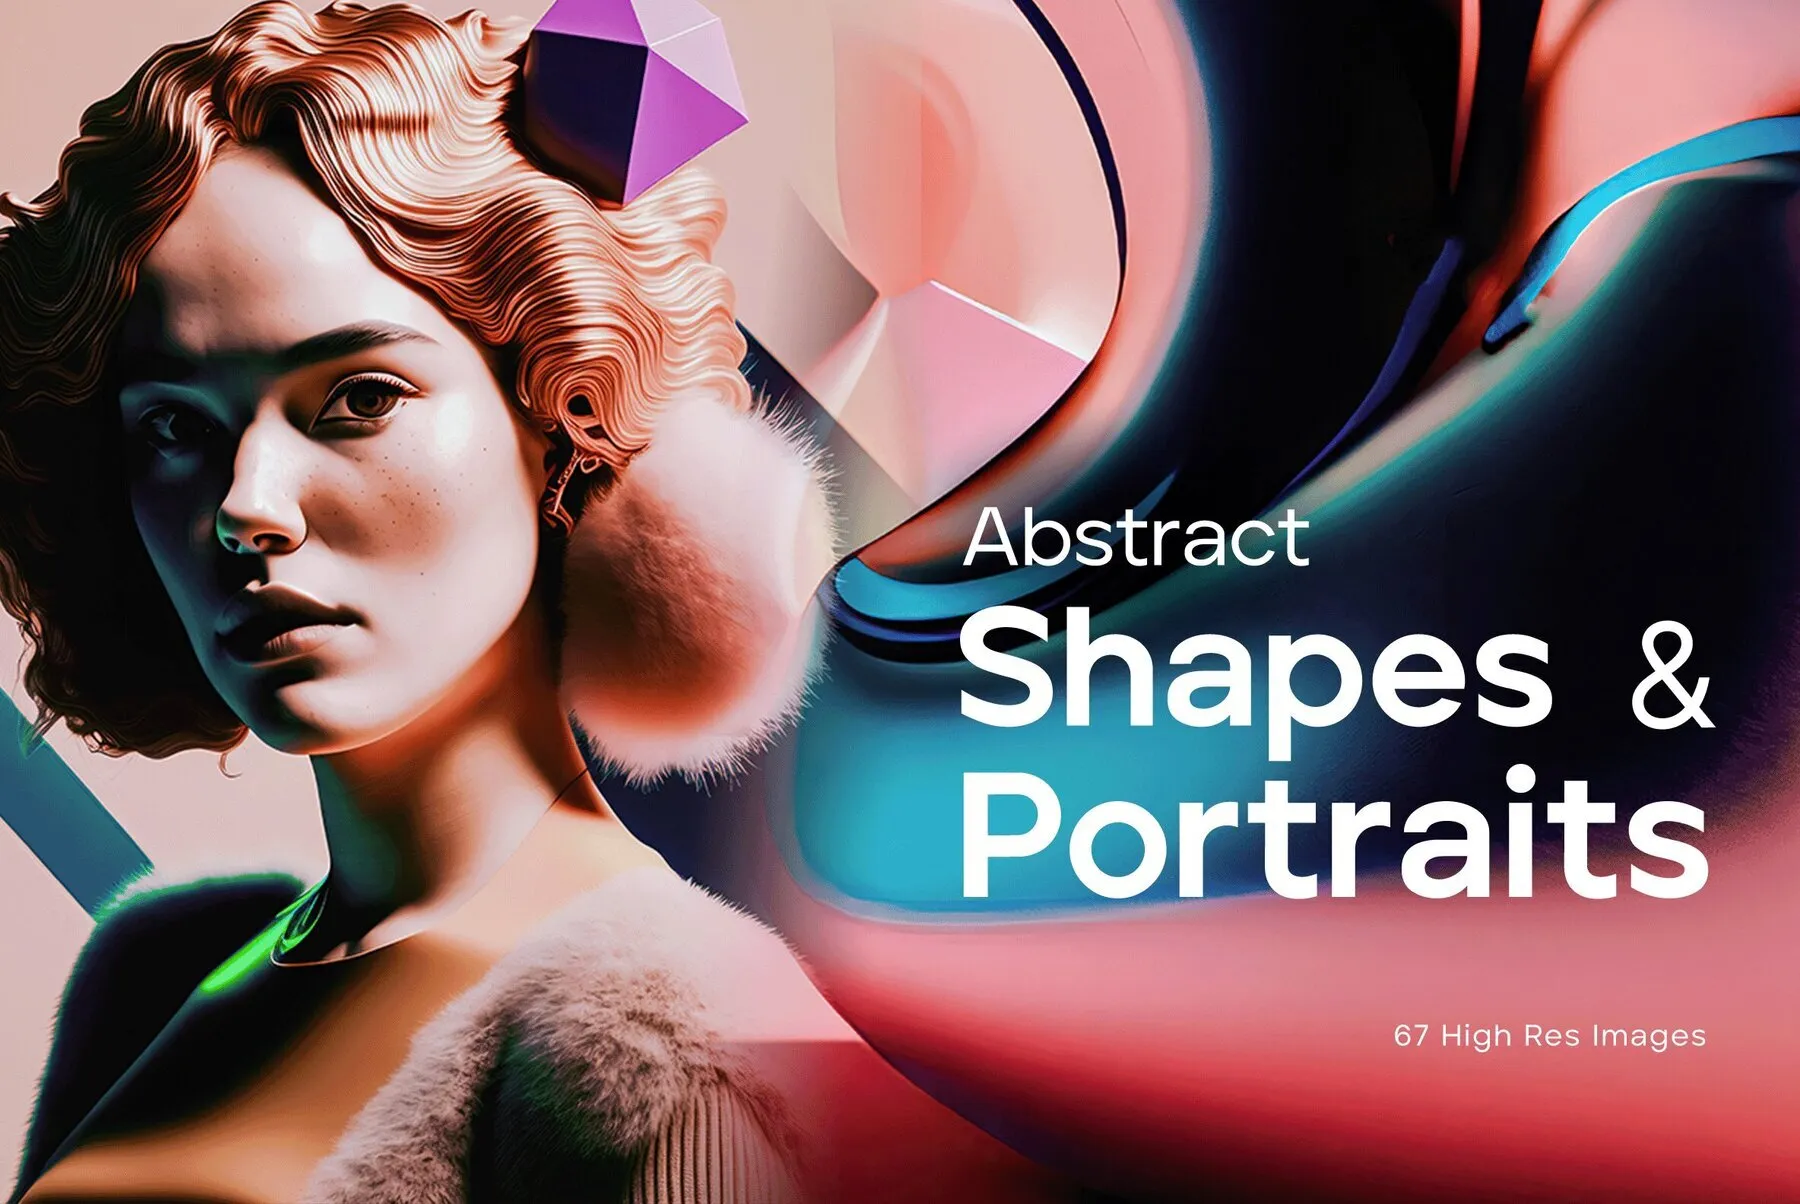 Abstract Shapes & Portraits